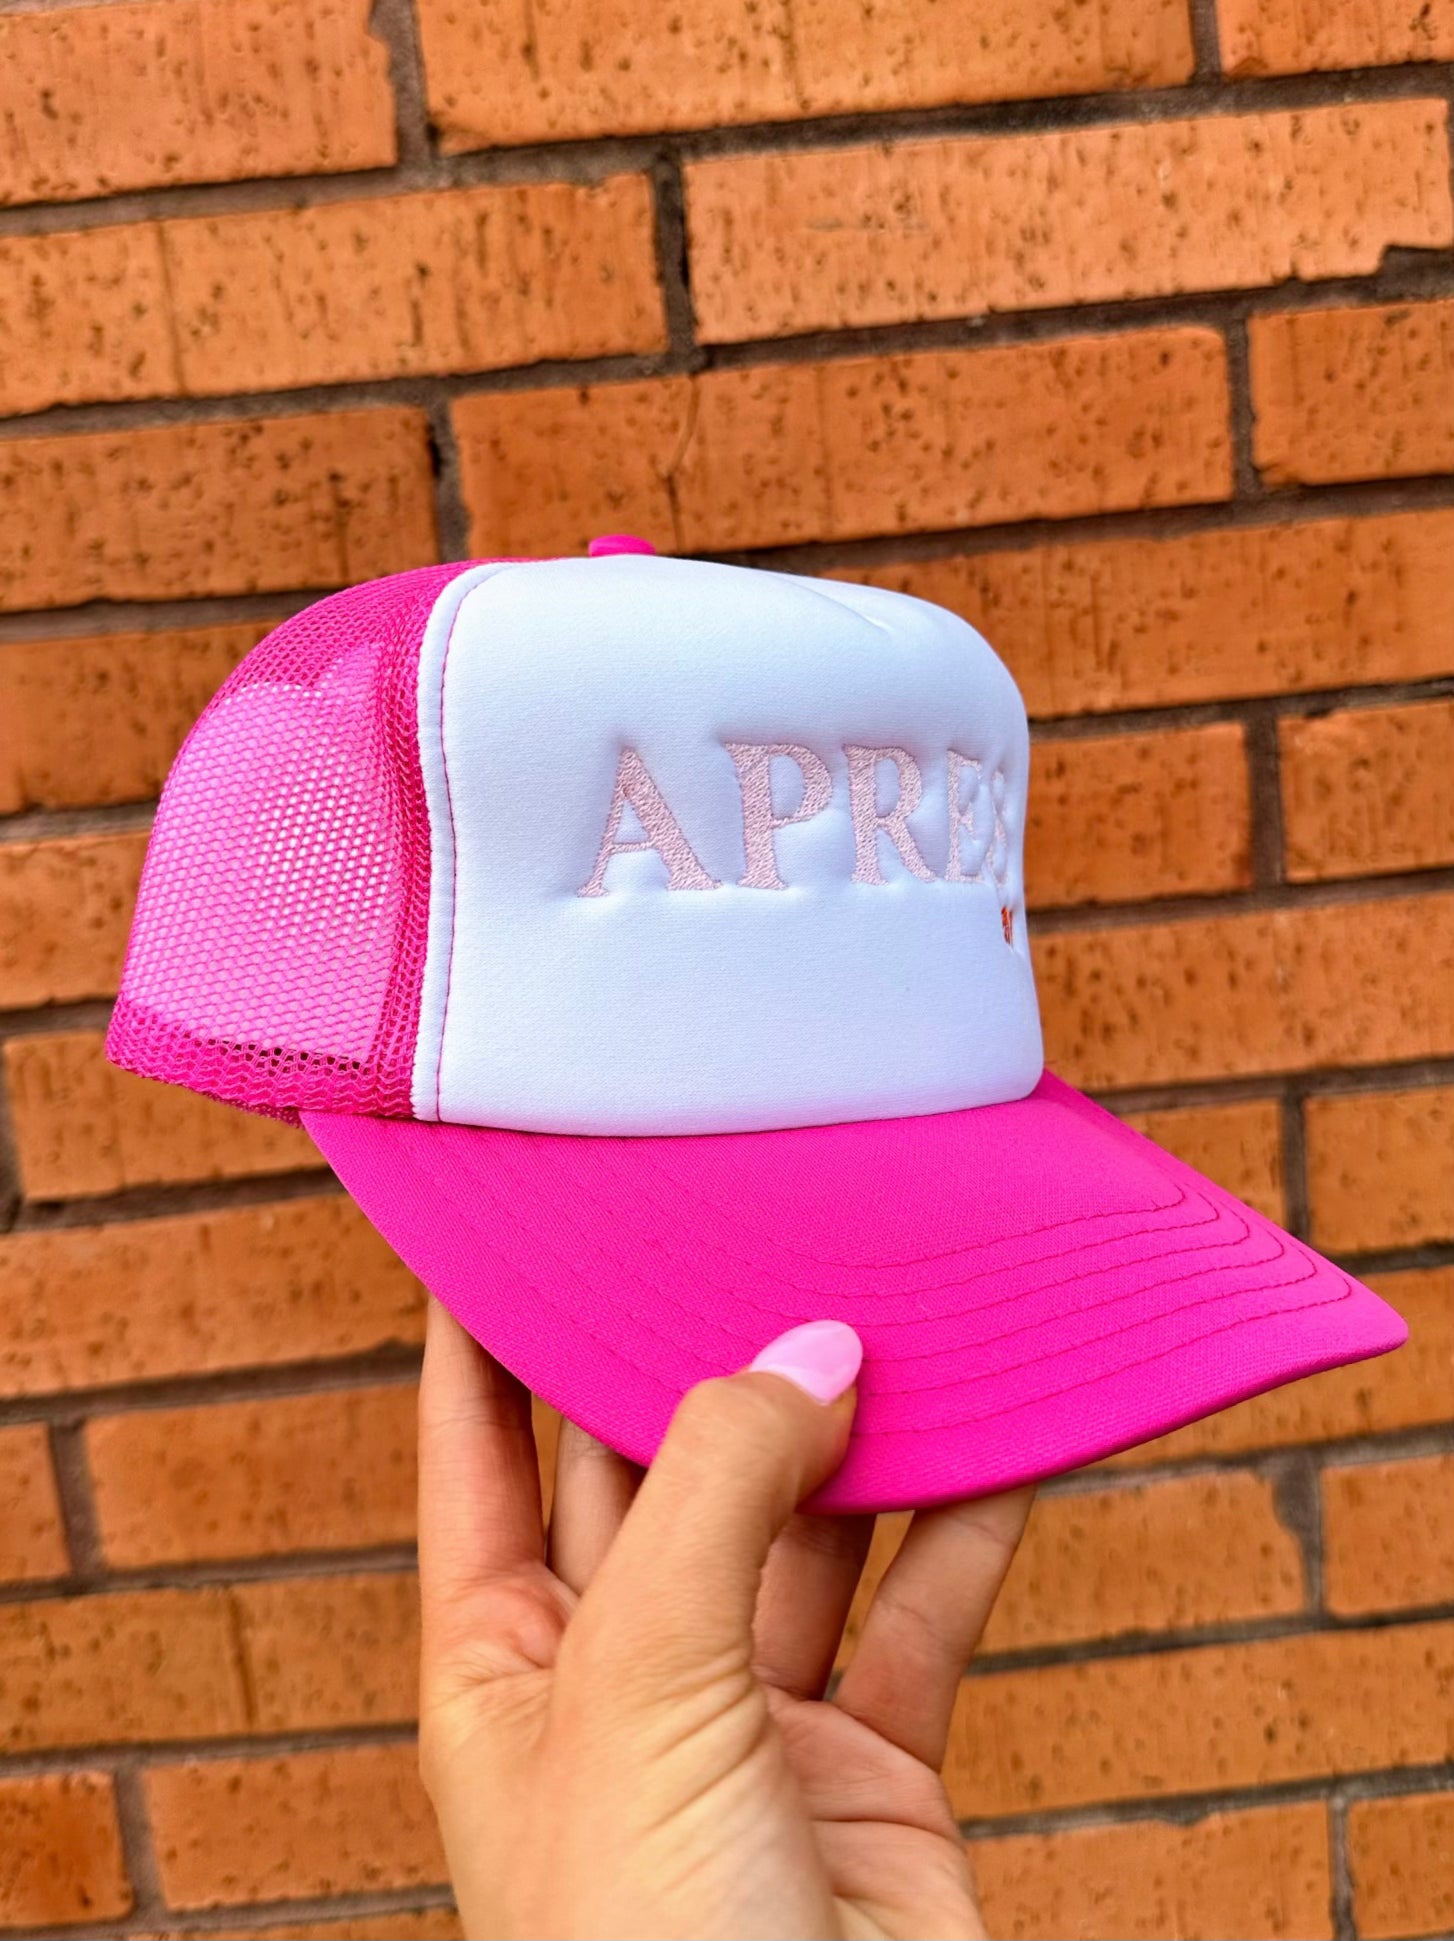 Apres Tan Pink and White Trucker Hat